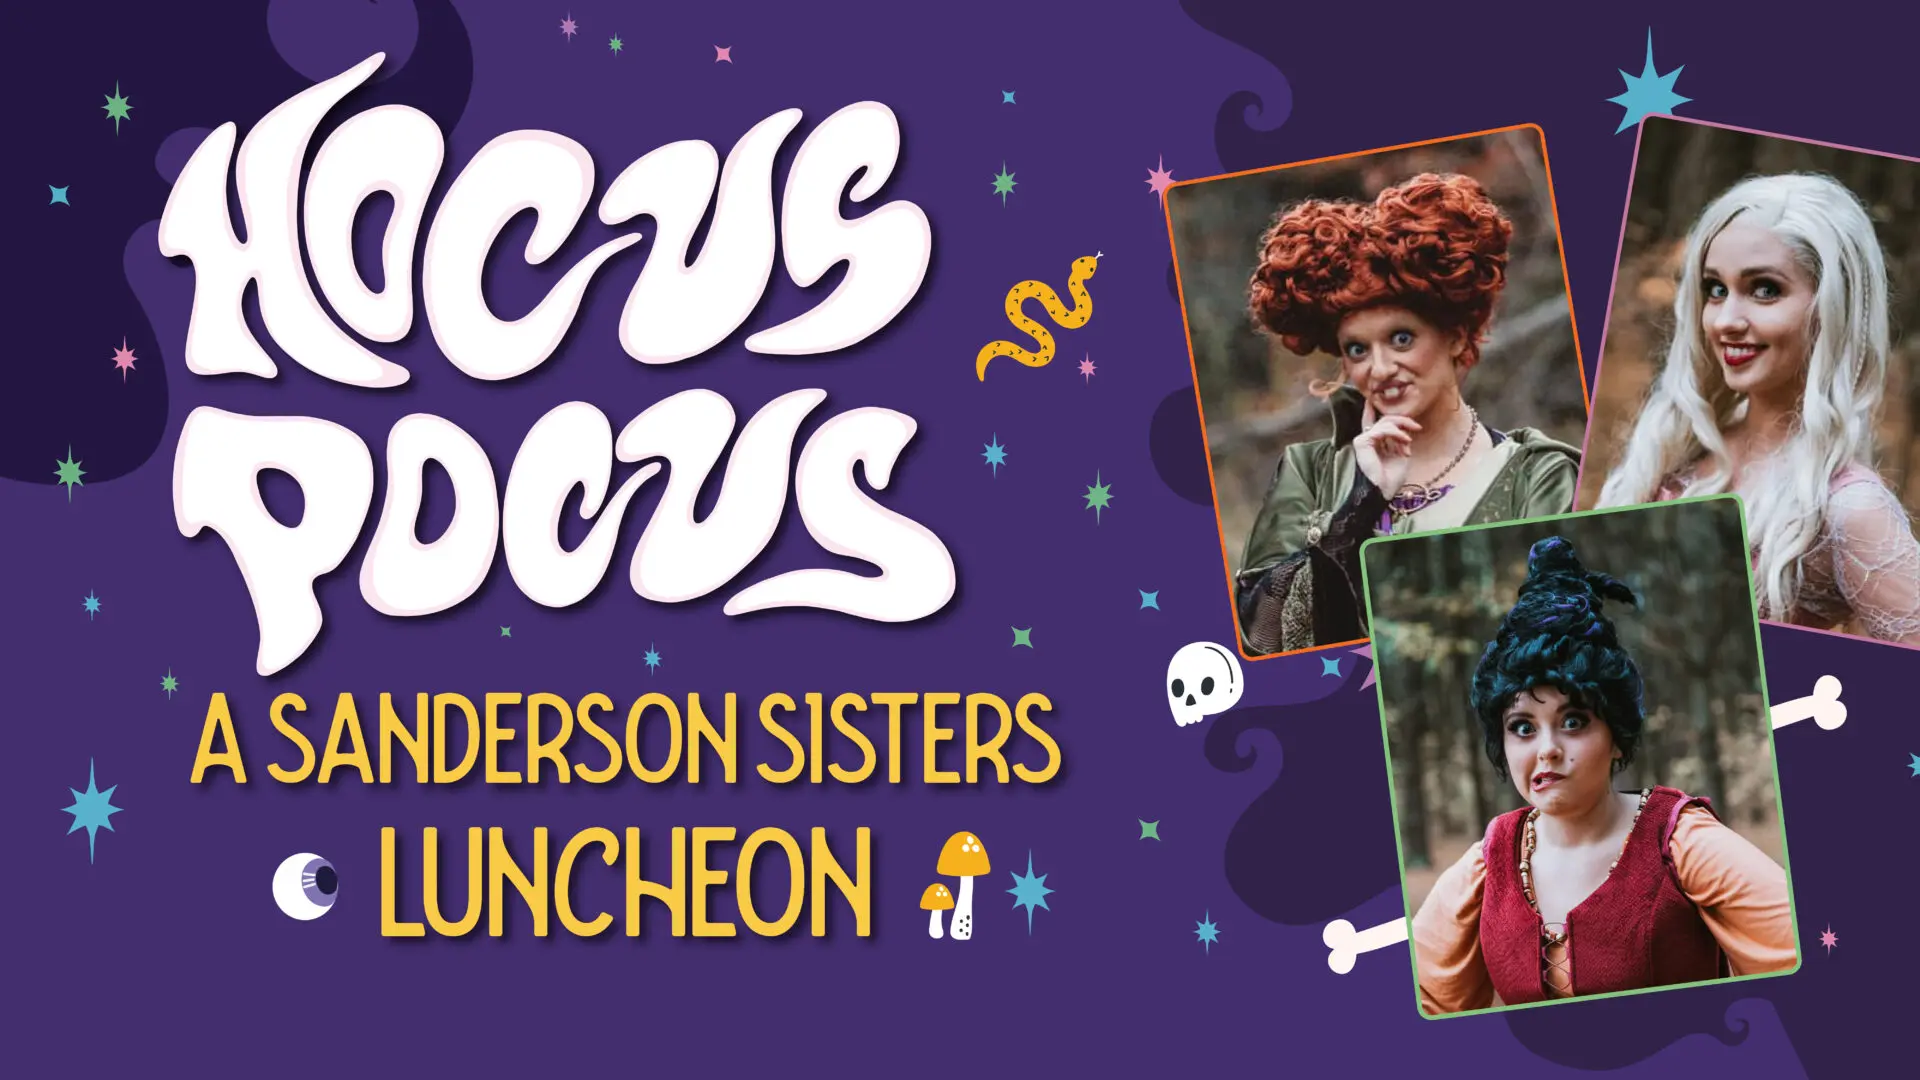 Hocus Pocus': How Old Are the Sanderson Sisters?